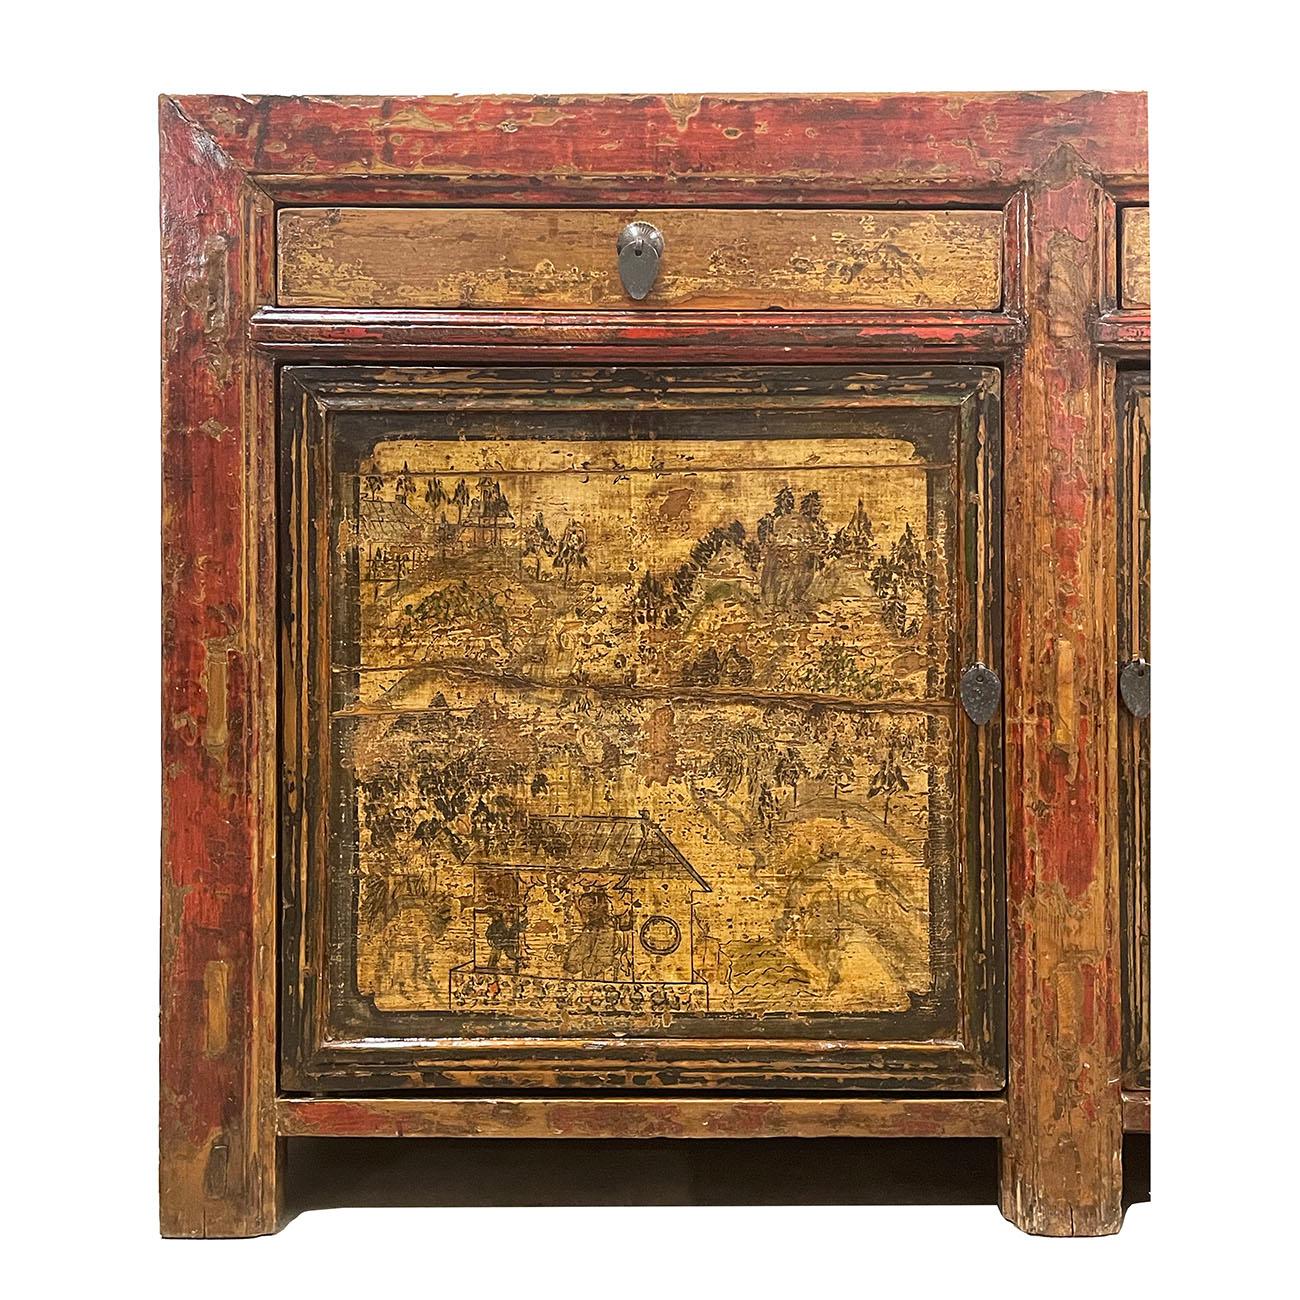 Chinese Export Late 19th Century Antique Chinese Mongolia Credenza, Sideboard, Buffet Table